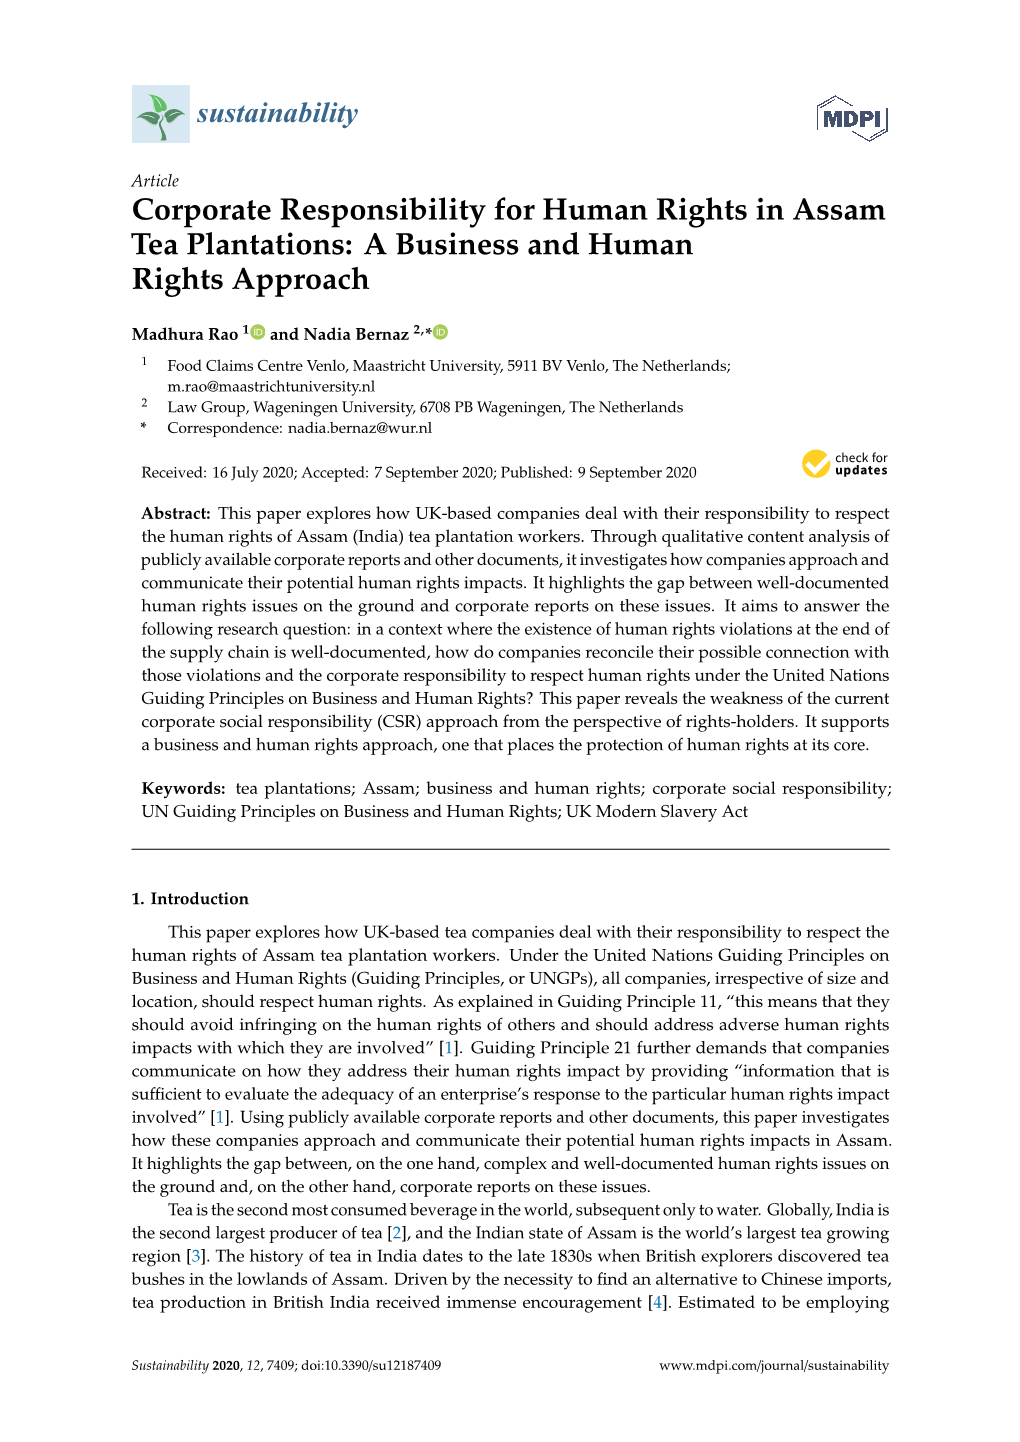 Corporate Responsibility for Human Rights in Assam Tea Plantations: a Business and Human Rights Approach